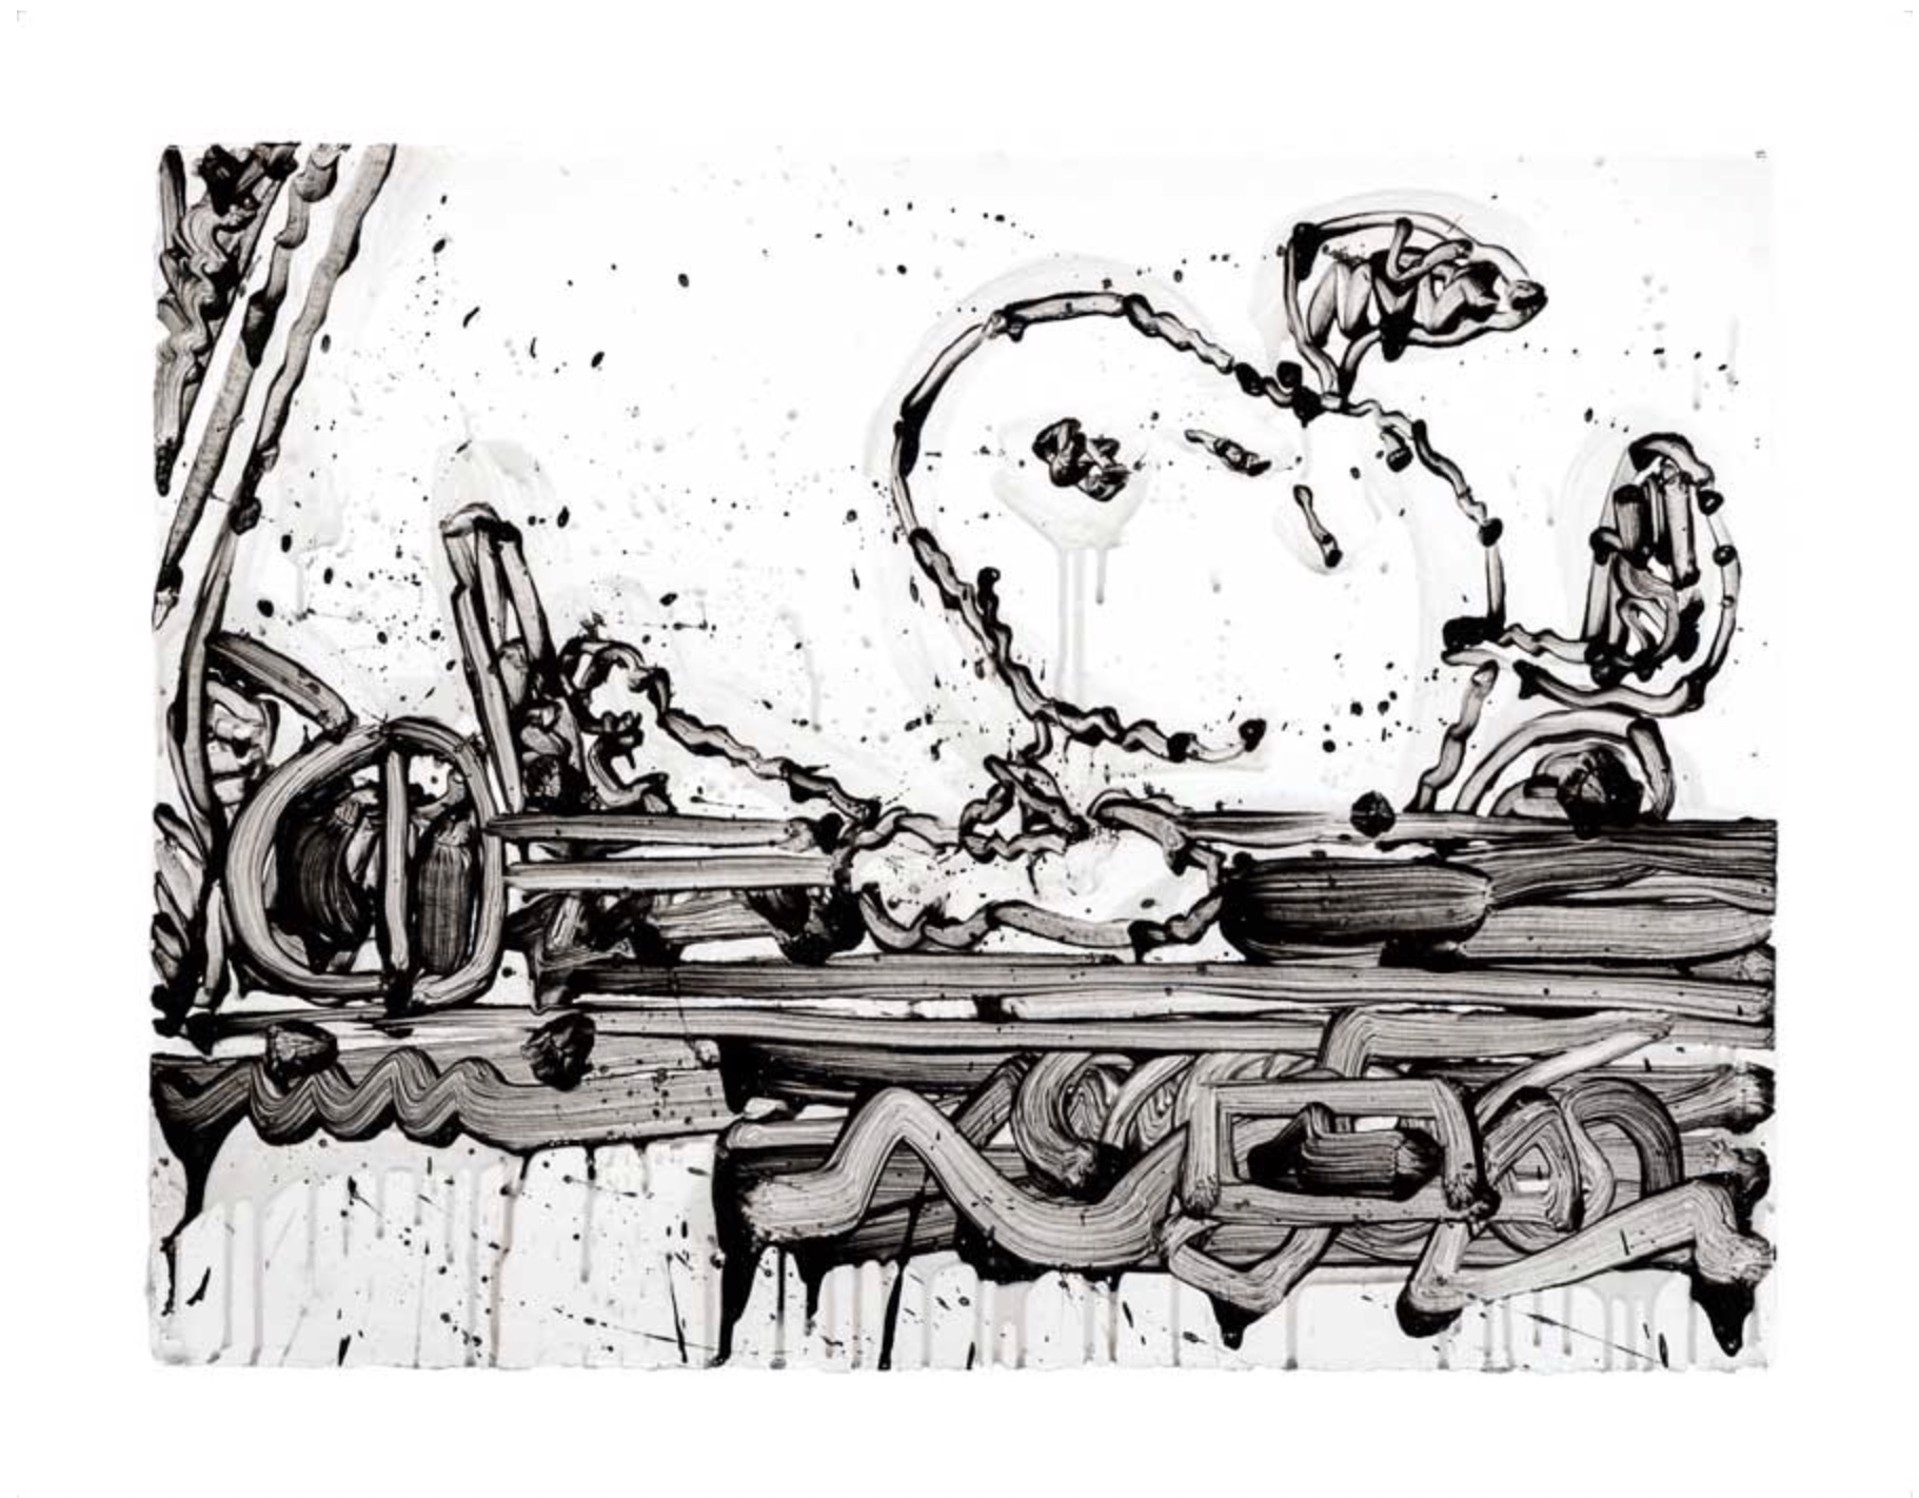 Maxi Taxi by Tom Everhart